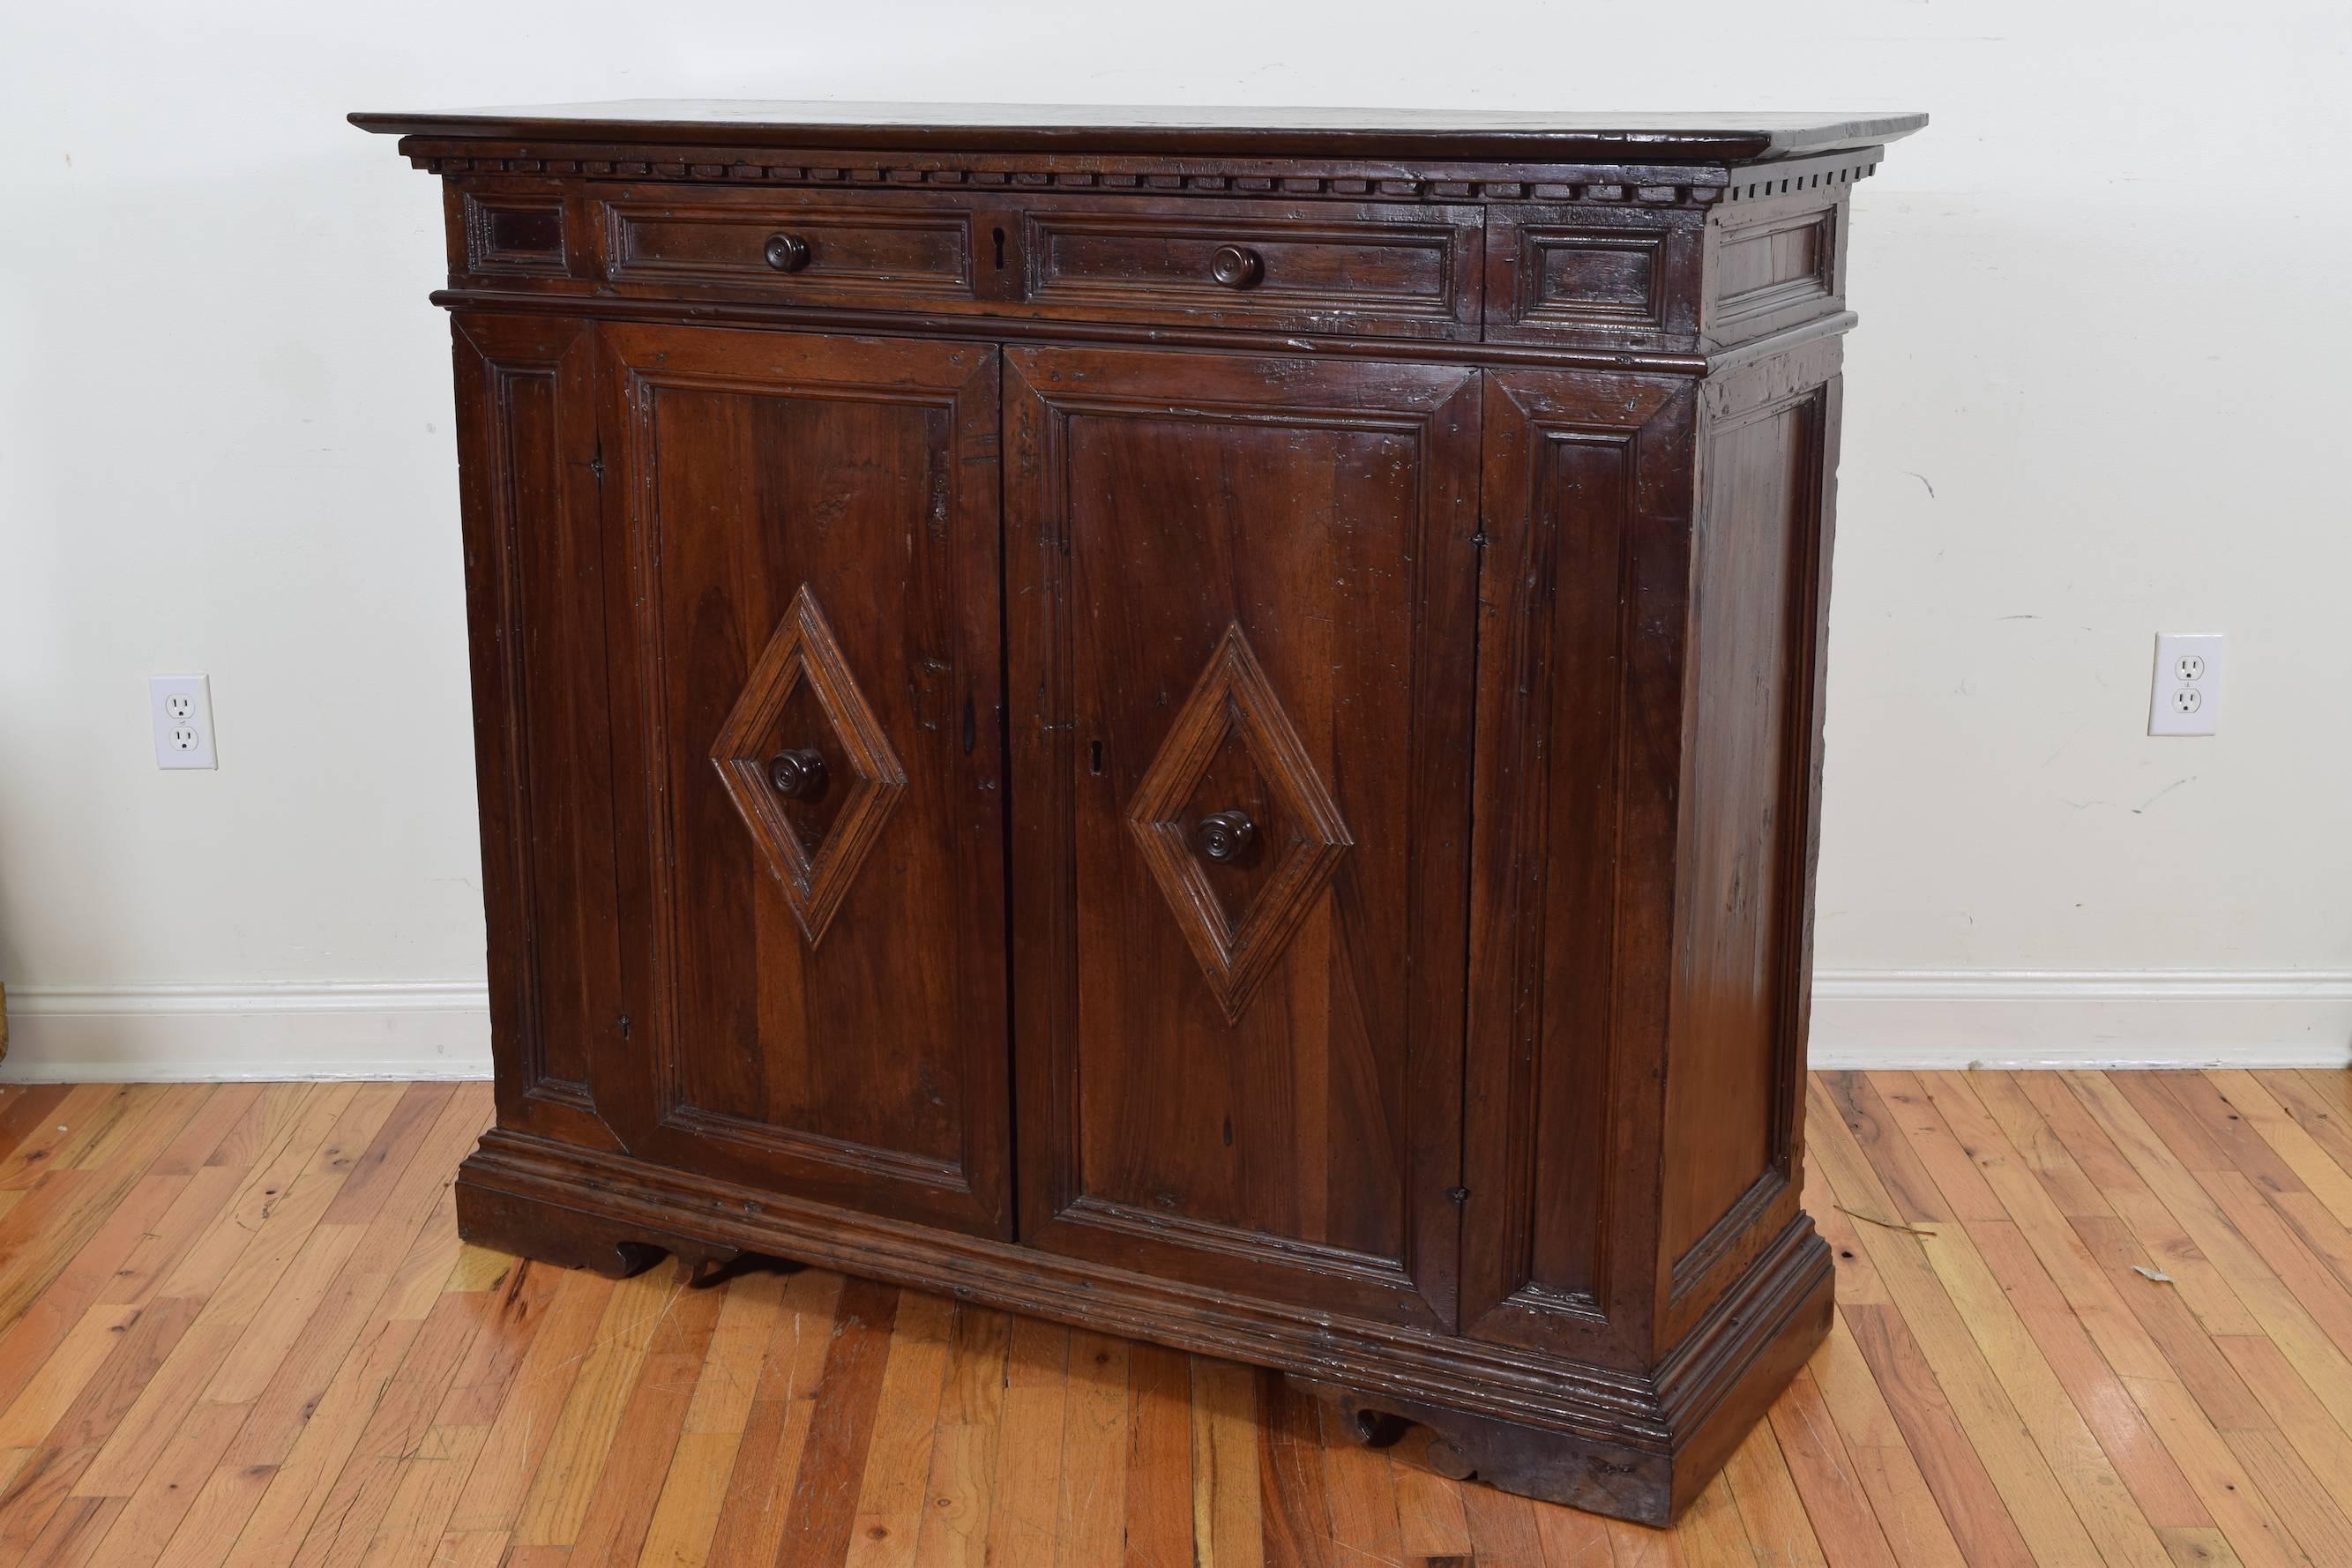 Credenza of shallow depth, the rectangular top with a dentil molded apron above a conforming case with paneled sections housing one drawer over two doors with raised lozenge panels and wooden pulls, raised on a graduated plinth base and bracket feet.